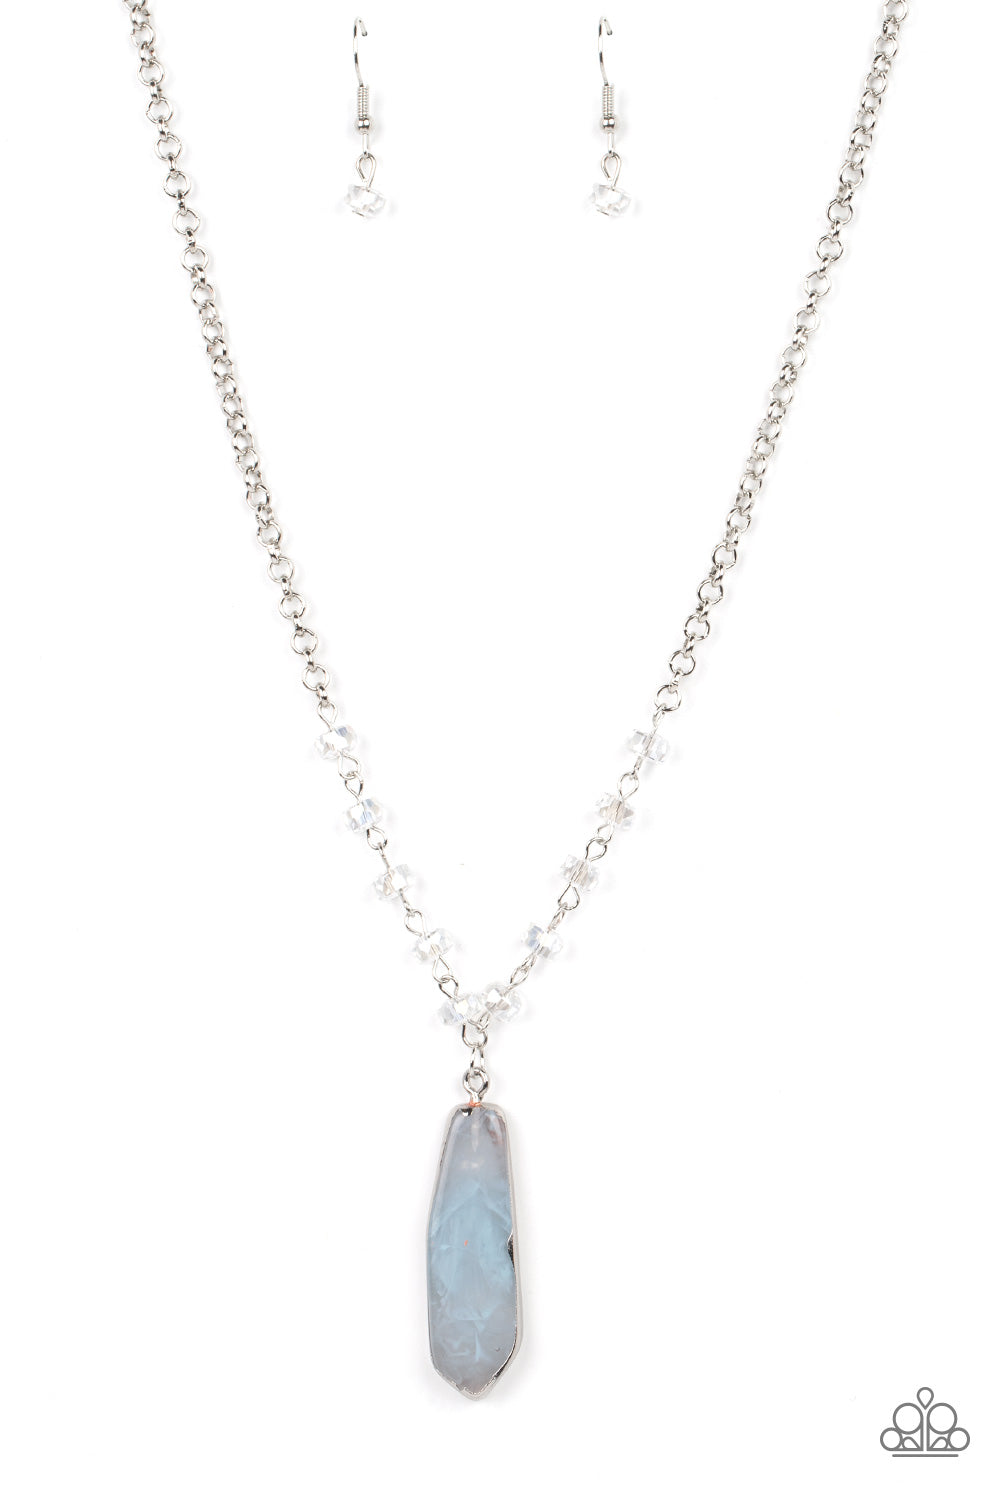 Magical Remedy - Blue and Silver Fashion Necklace - Paparazzi Accessories -  Faux stone finish, Glacier Lake smoke in an acrylic frame below the collar. Glittery crystal-like beads sparkle along the silver chain, drawing attention to the mystical pendant. Features an adjustable clasp closure.